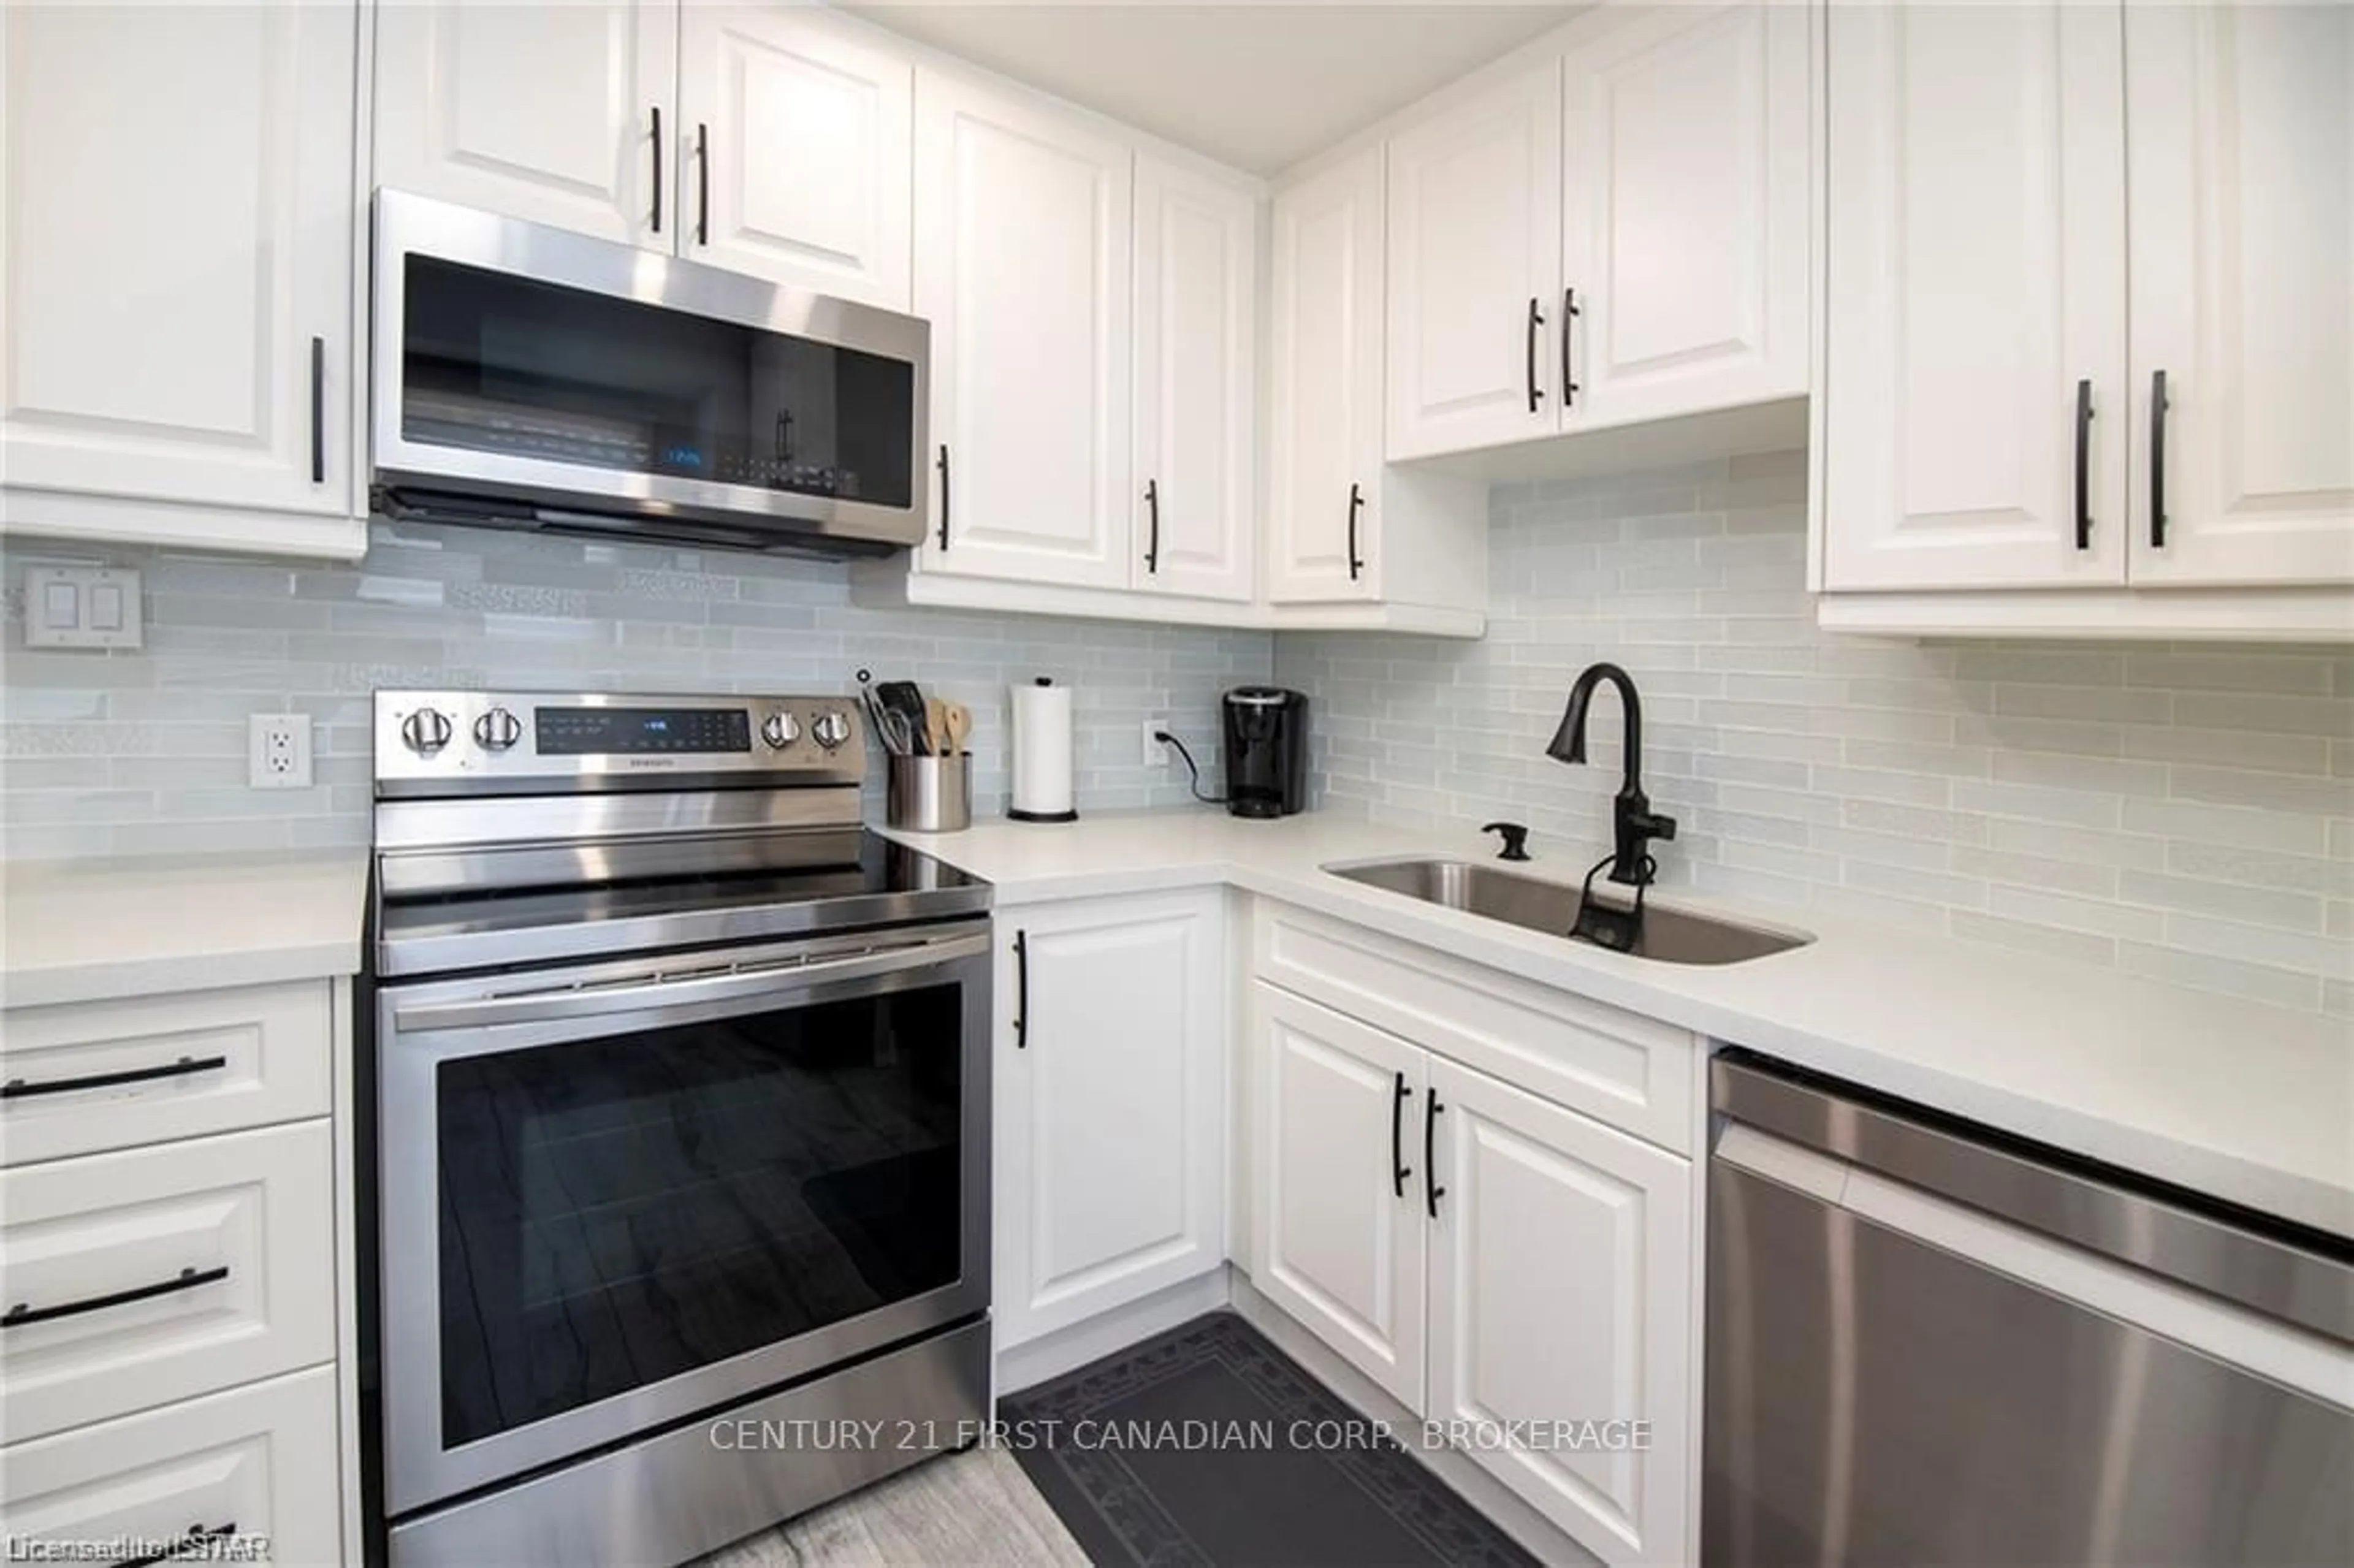 Standard kitchen for 757 Wharncliffe Rd #10, London Ontario N6J 2N7